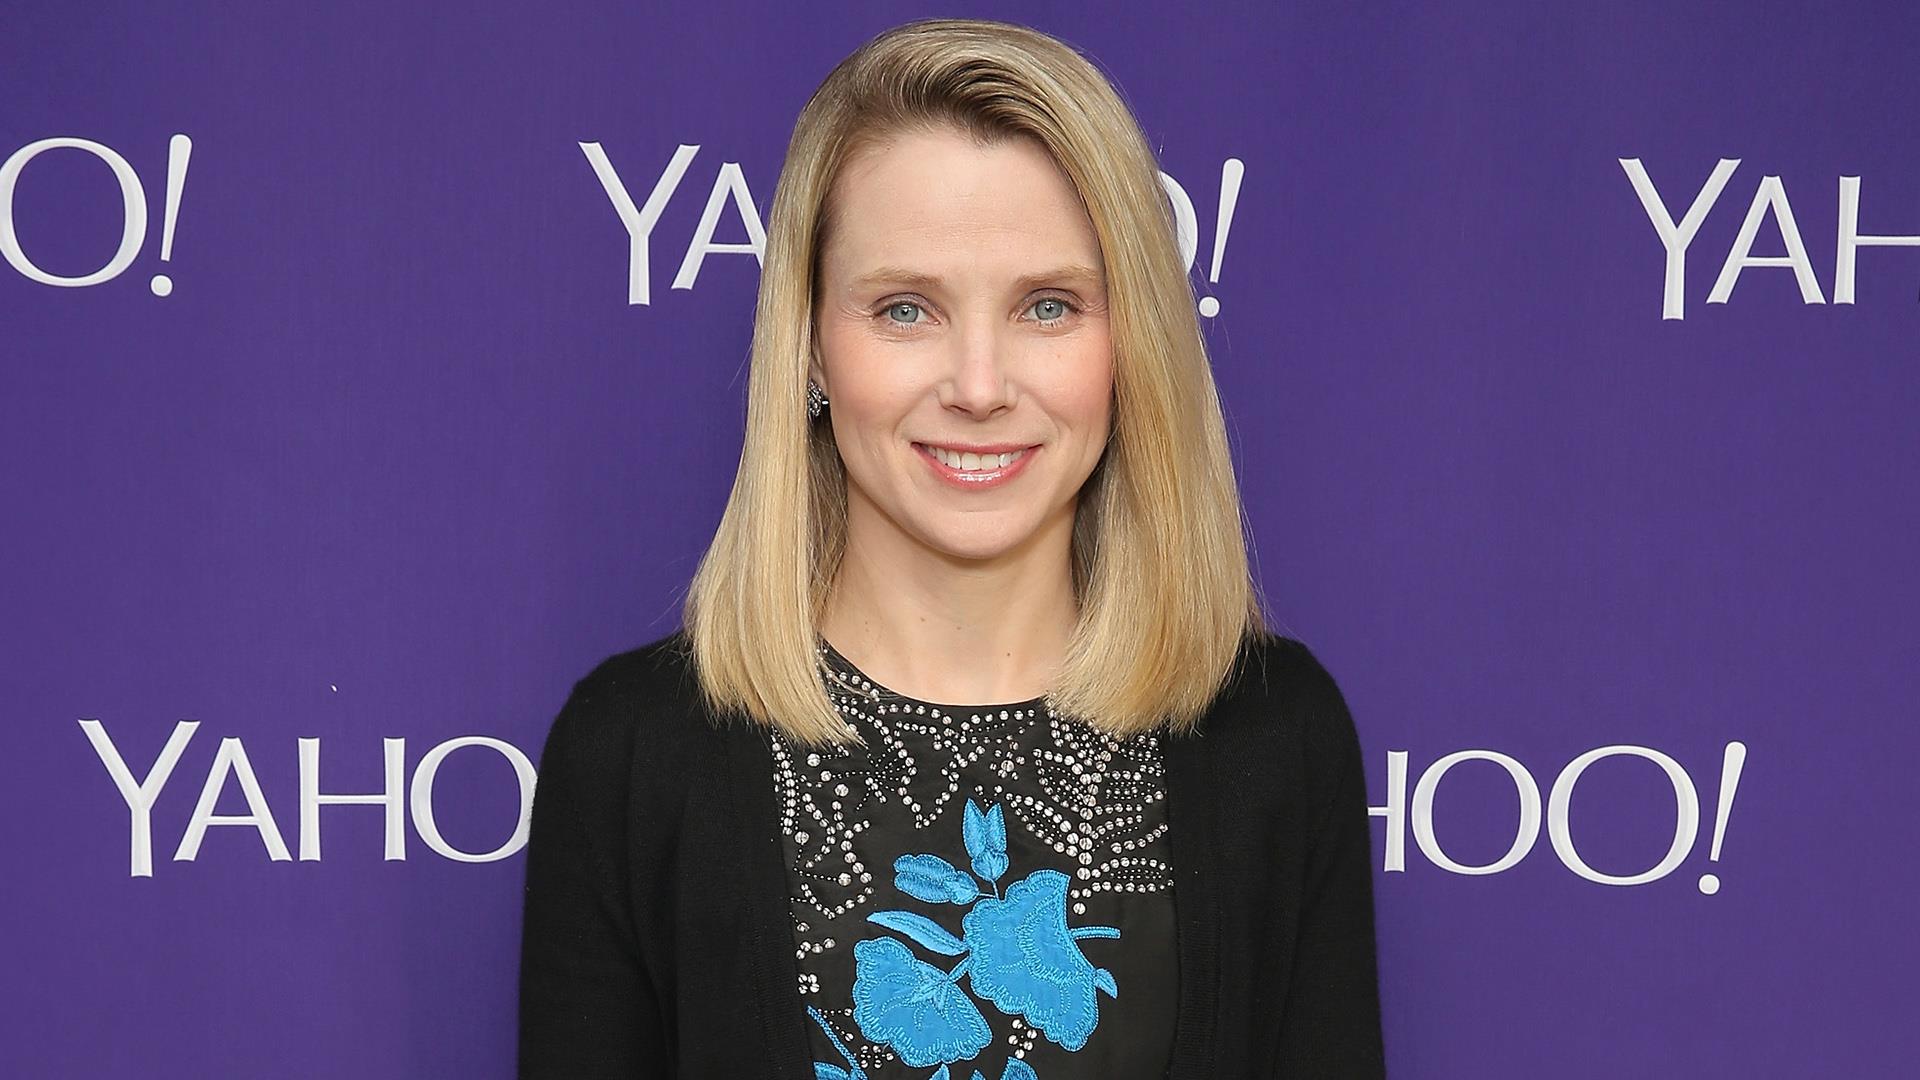 What's next for Marissa Mayer after resigning from Yahoo board of directors?